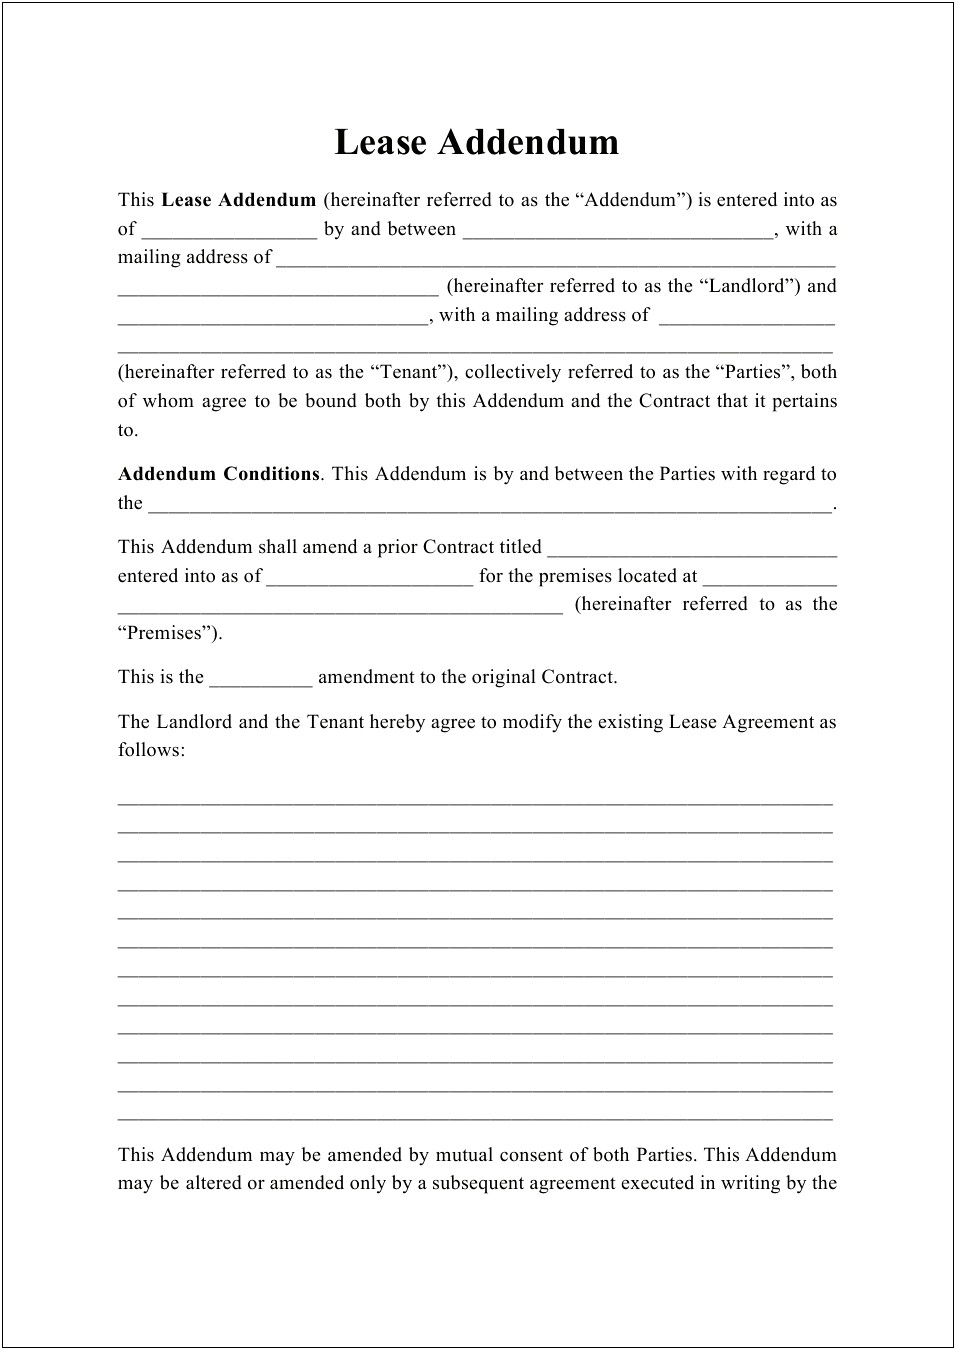 Standard Lease Agreement Template Free South Africa